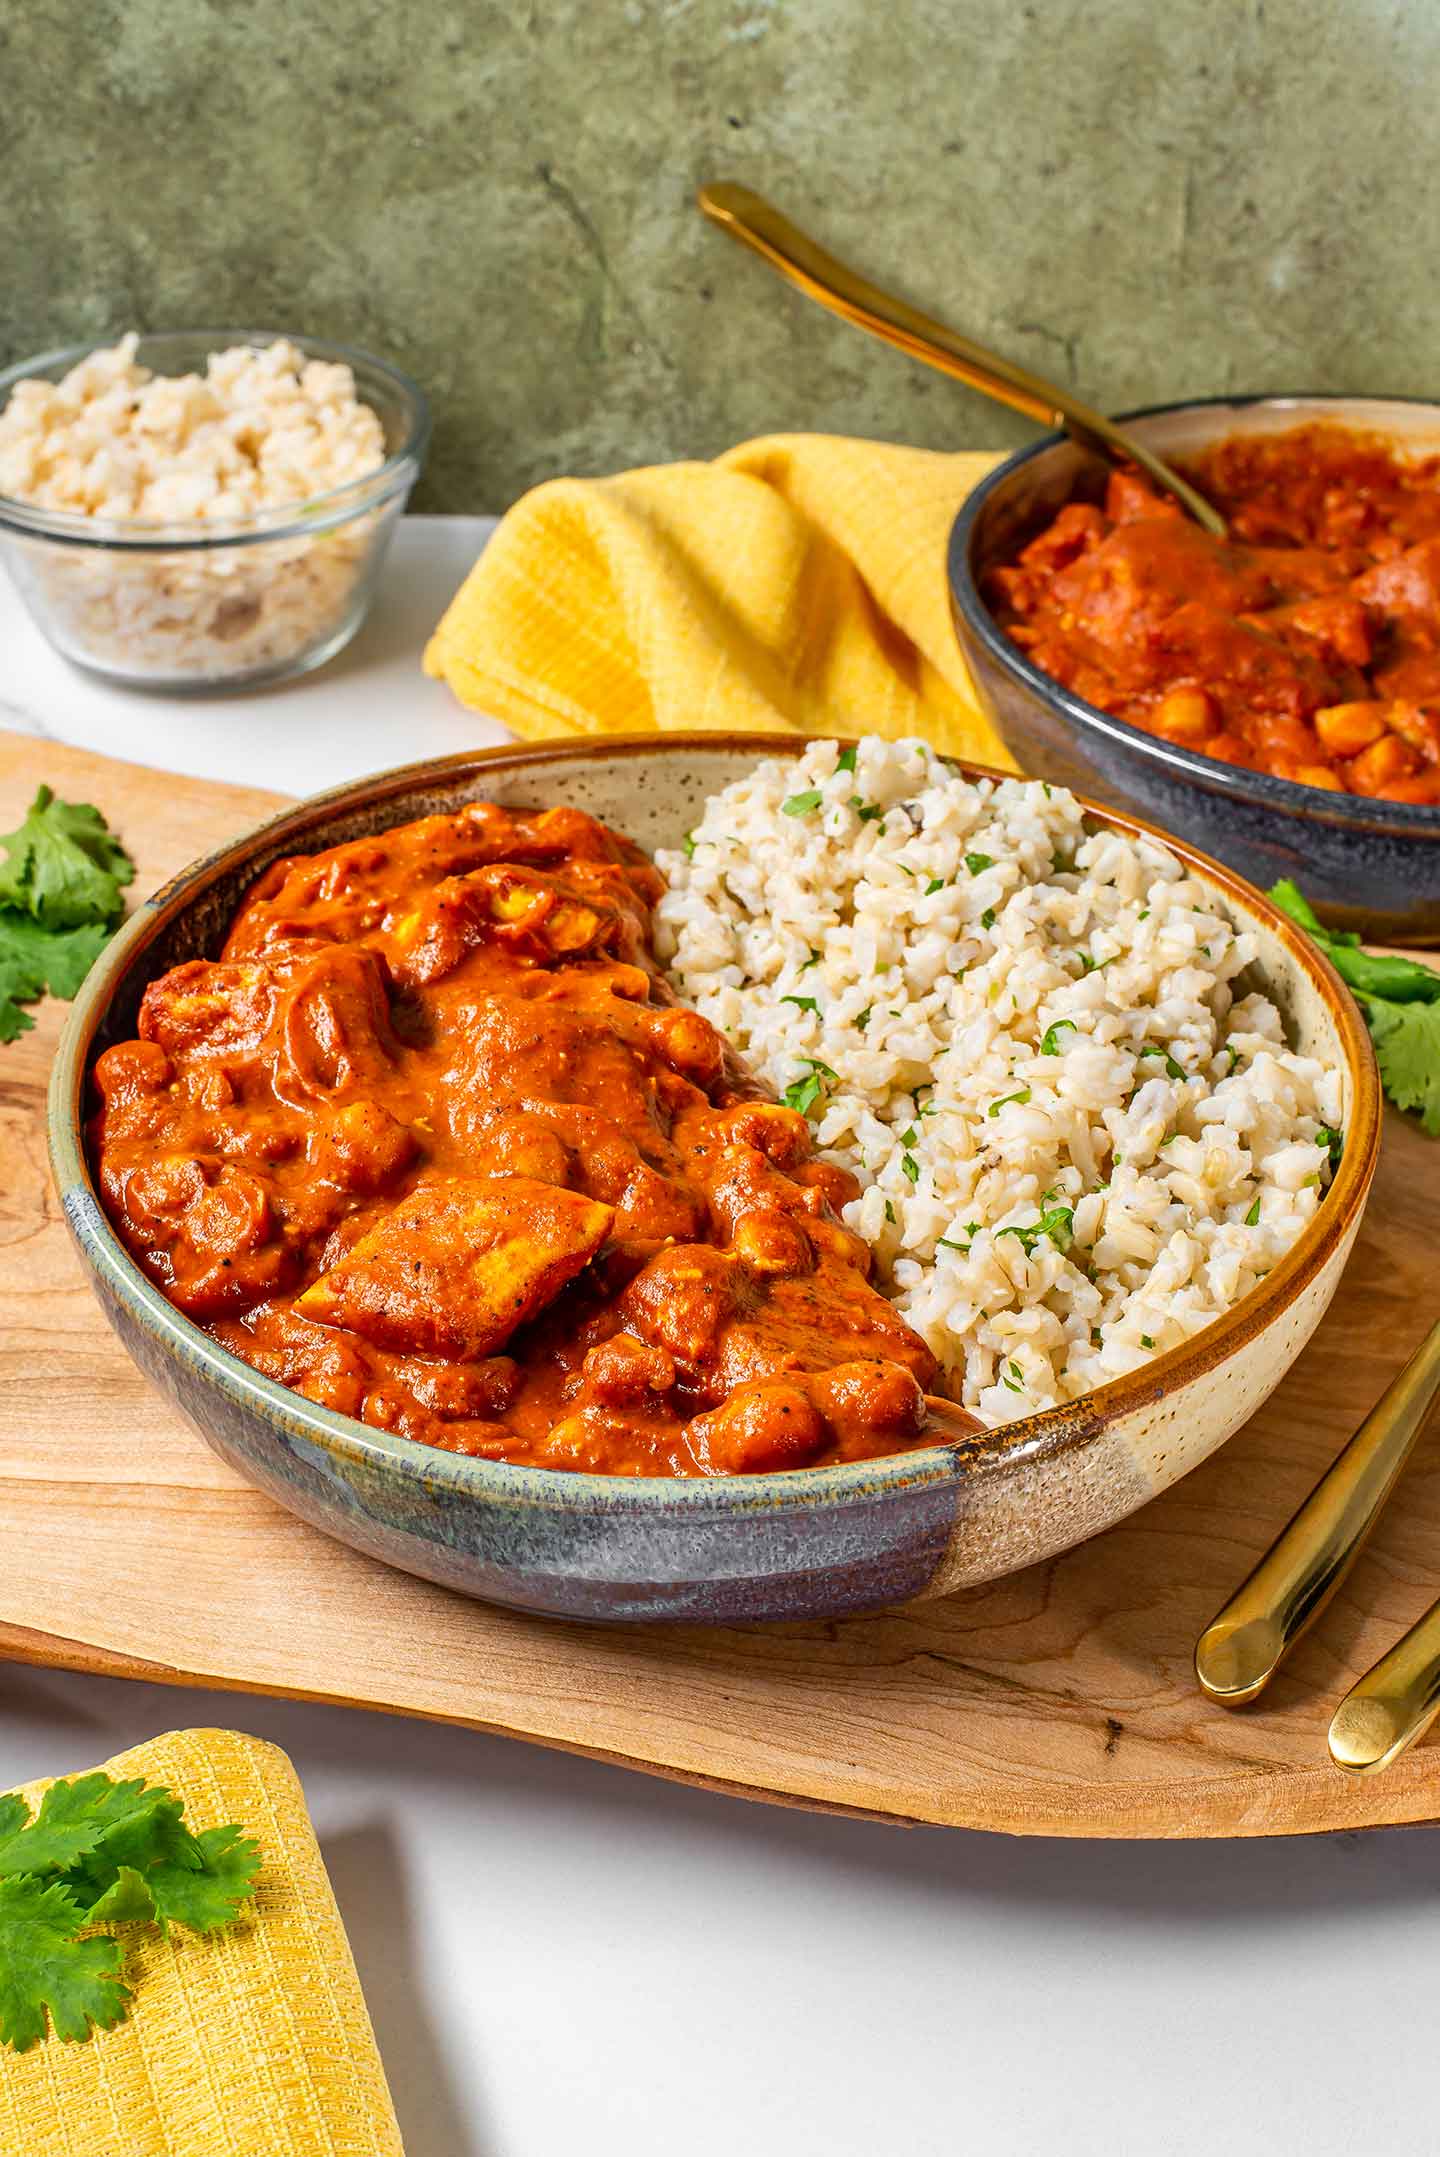 Large chunks of tofu and chickpeas covered in a thick reddish orange gravy make a delicious vegan butter chicken served alongside rice.